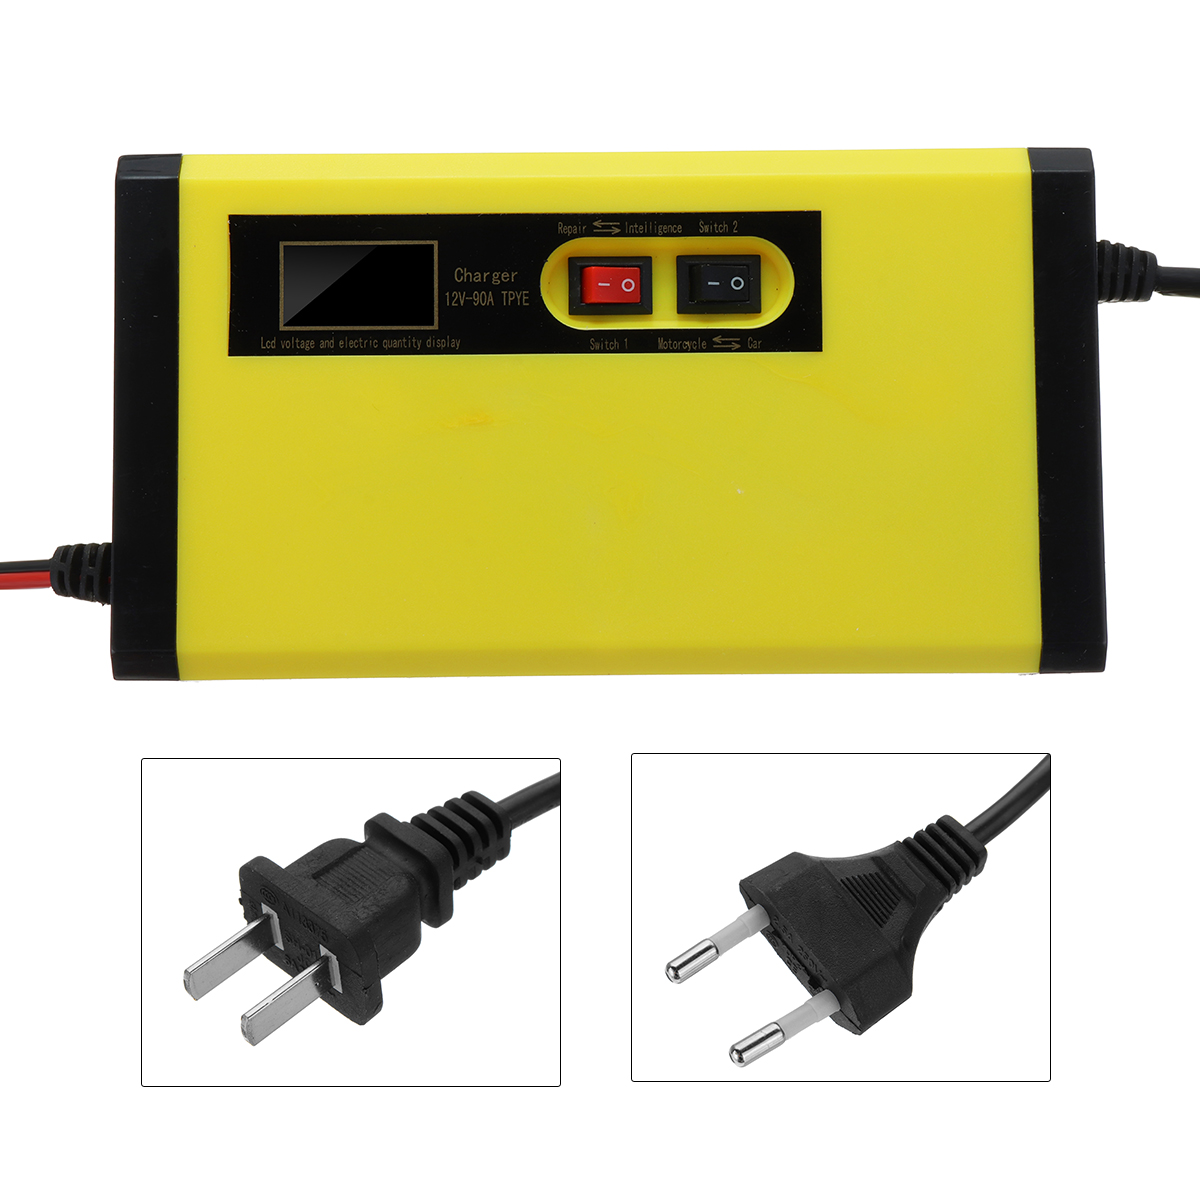 DC-12V-8A-Pulse-Repair-Battery-Charger-For-Car-Motorcycle-AGM-GEL-WET-Lead-Acid-Battery-LCD-1369648-2